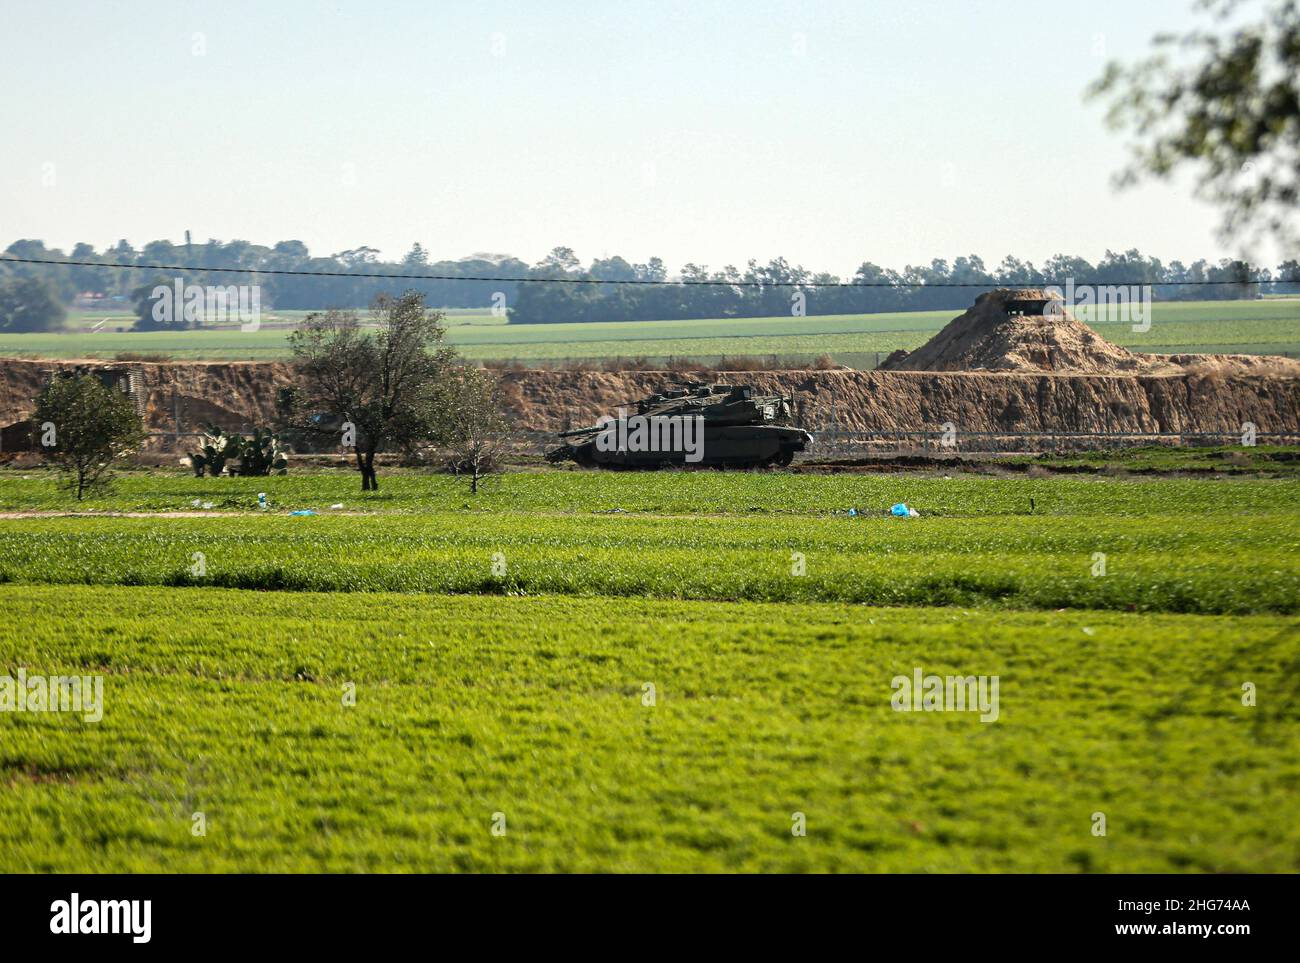 Gaza, Palestine. 18th Jan, 2022. An Israeli military tank was seen driving inside the Palestinian territories at the border in Khuza'a, east of Khan Yunis, south of the Gaza Strip. (Photo by Yousef Masoud/SOPA Images/Sipa USA) Credit: Sipa USA/Alamy Live News Stock Photo